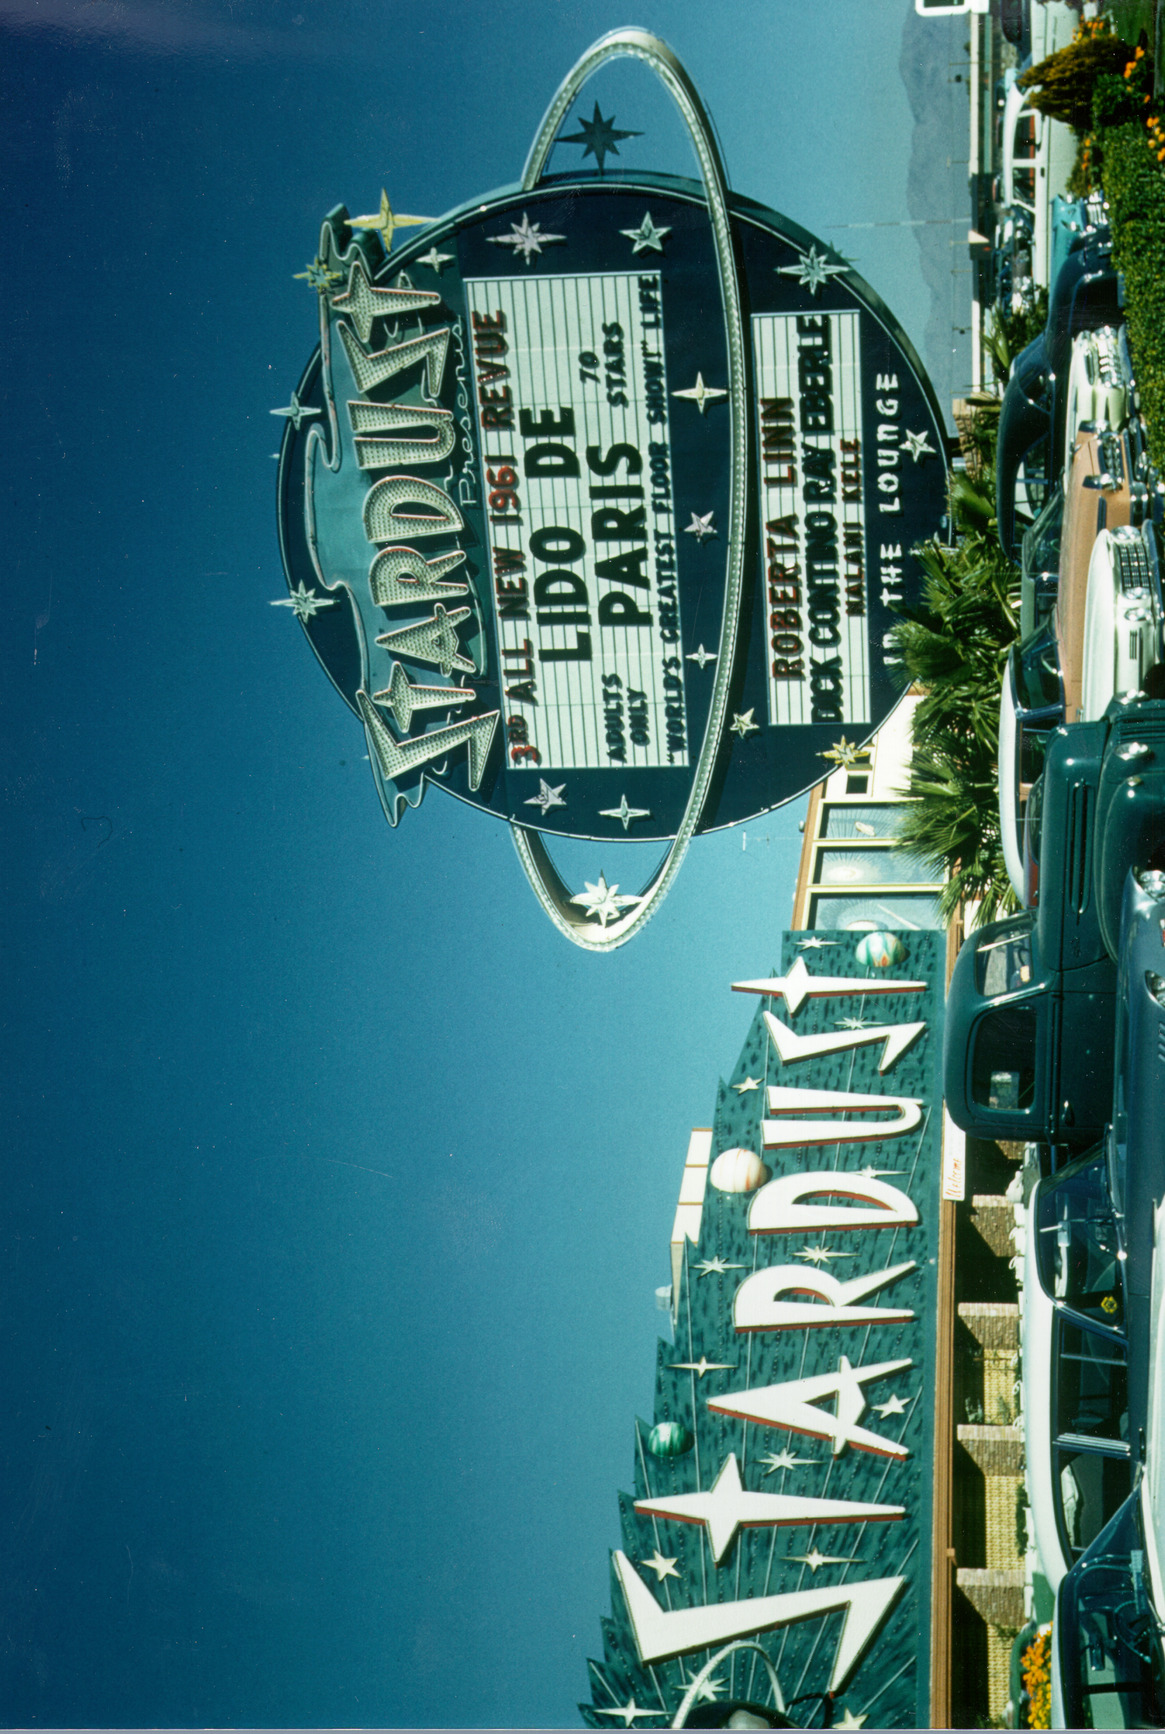 Photograph of the front exterior and parking lot of the Stardust Hotel and Casino (Las Vegas), circa 1961